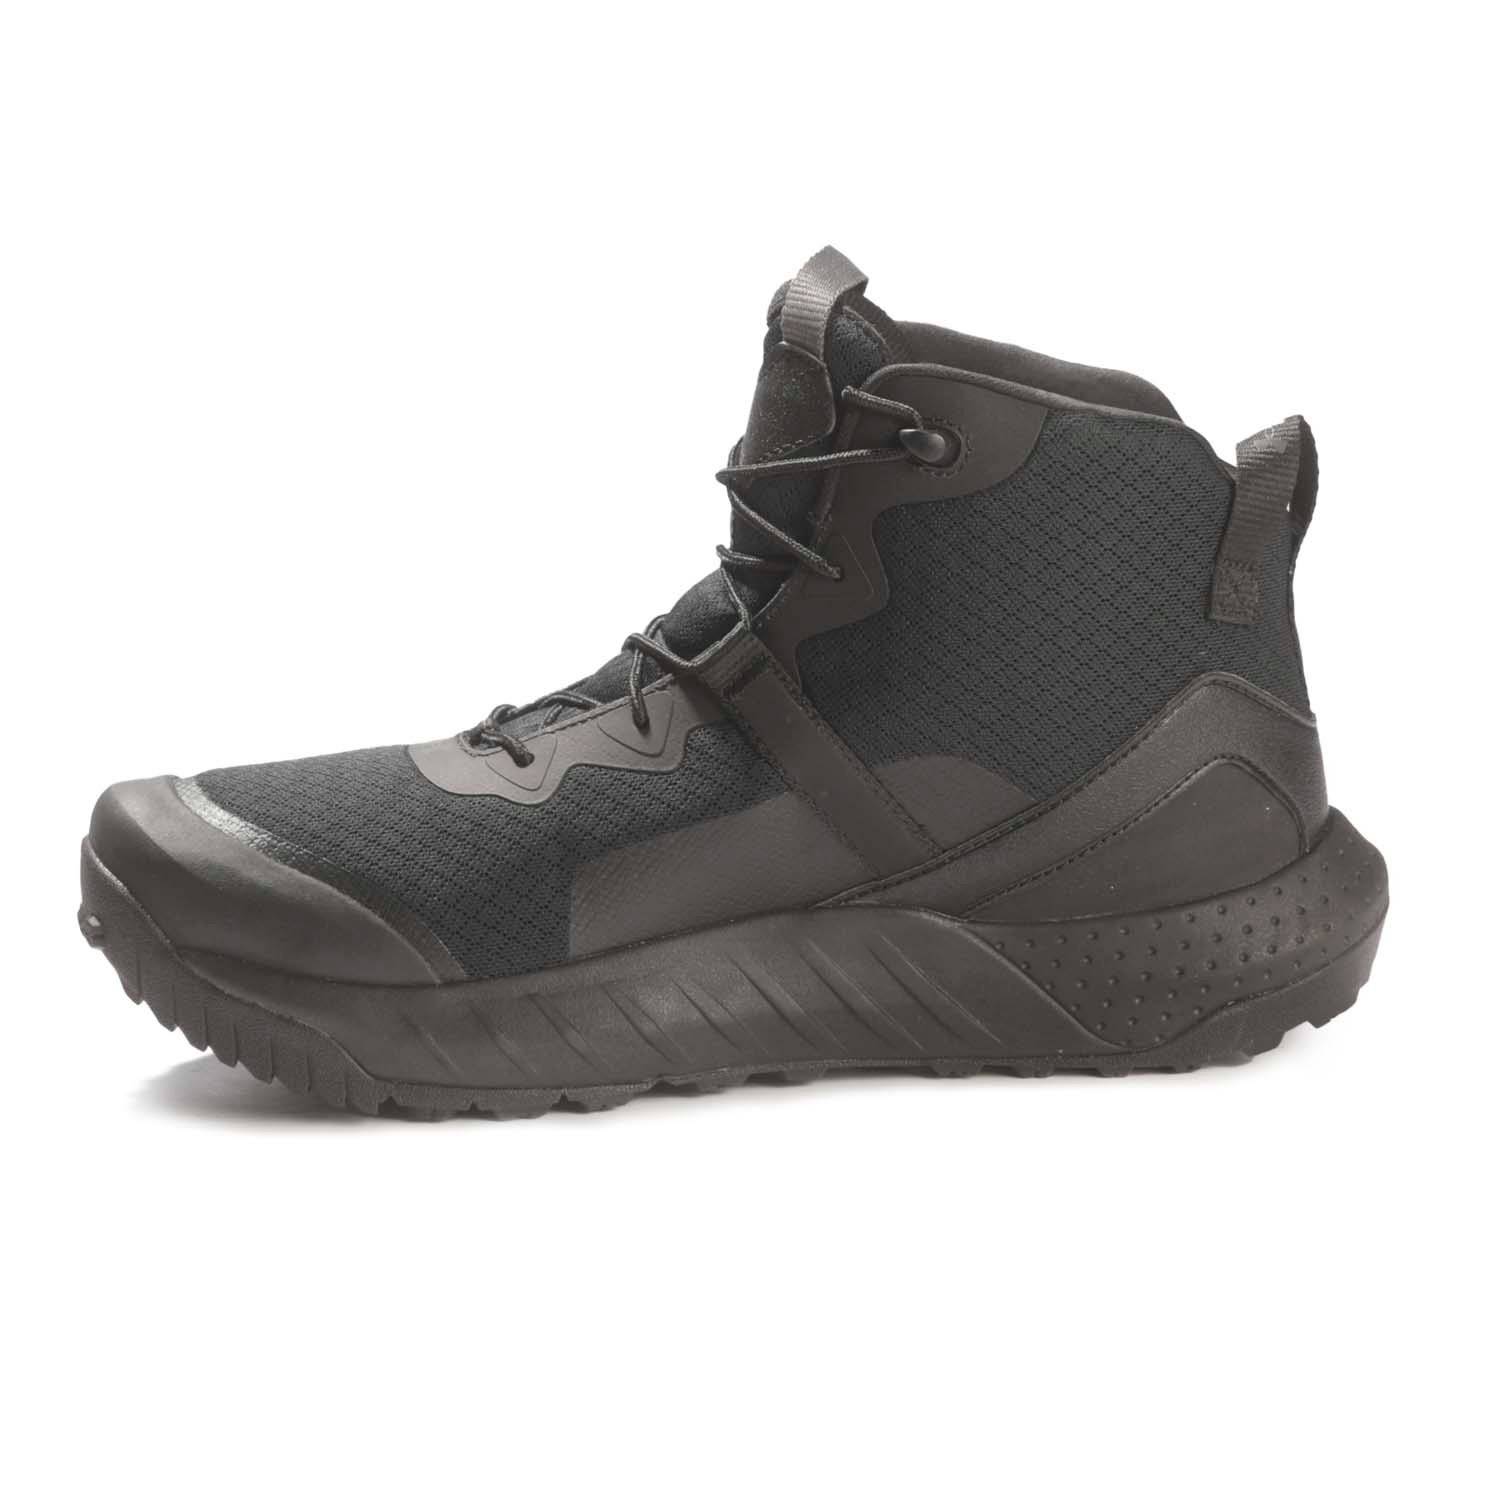 Micro G Valsetz Mid Tactical Boots - Black - Joint Force Tactical